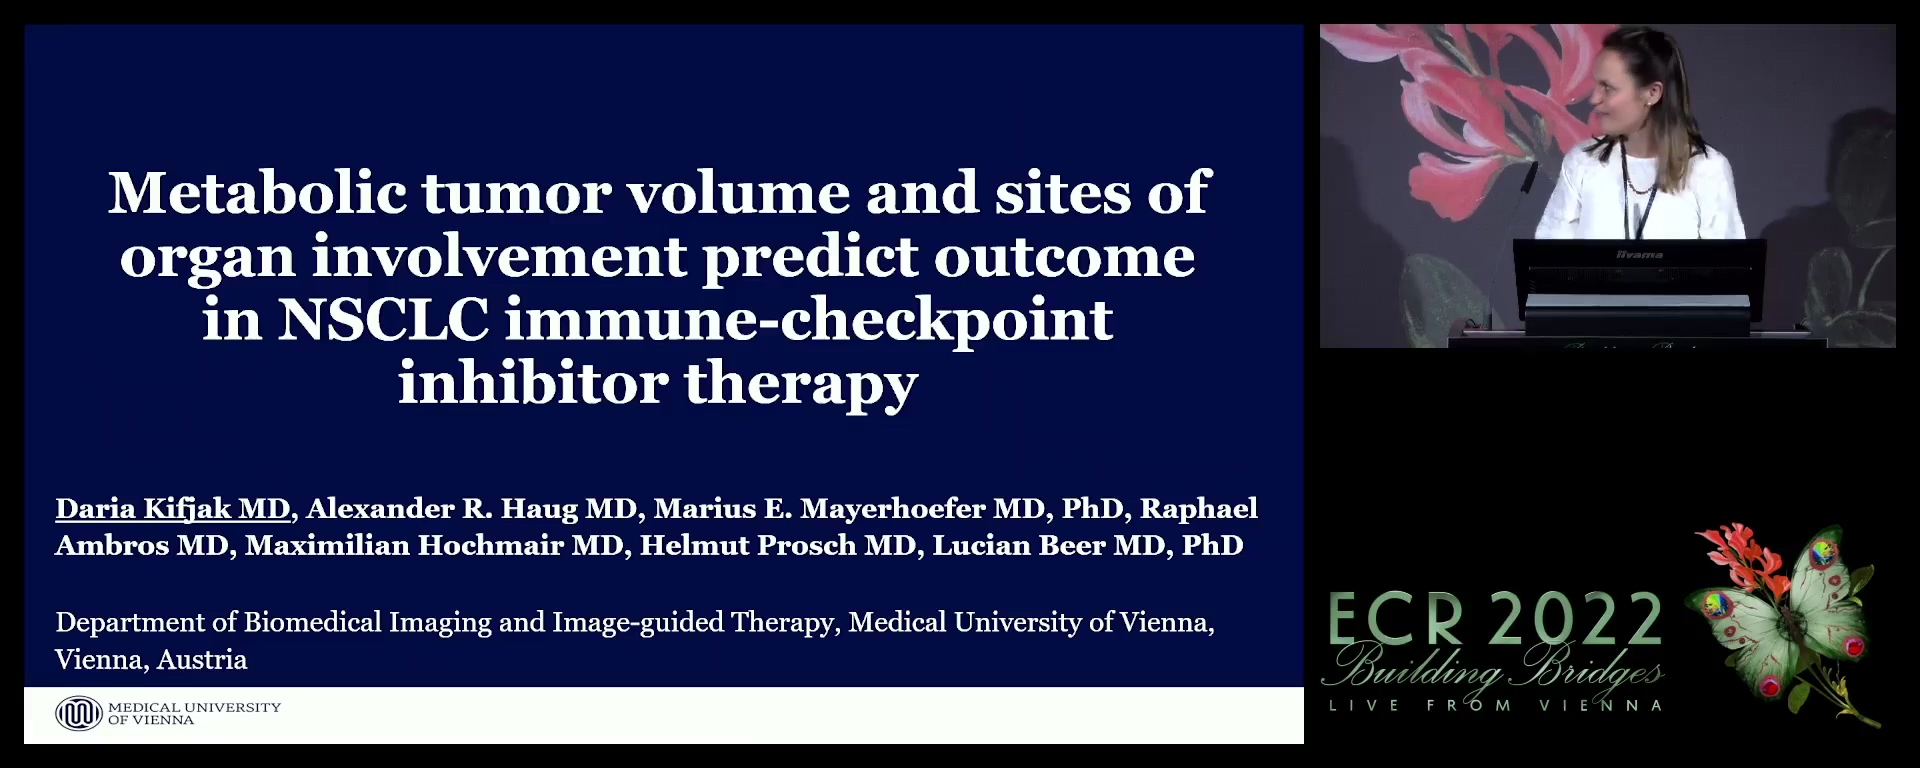 Pre-treatment metastatic site-specific metabolic tumour volume is associated with clinical endpoints in patients with NSCLC receiving immunotherapy - Daria Kifjak, Vienna / AT